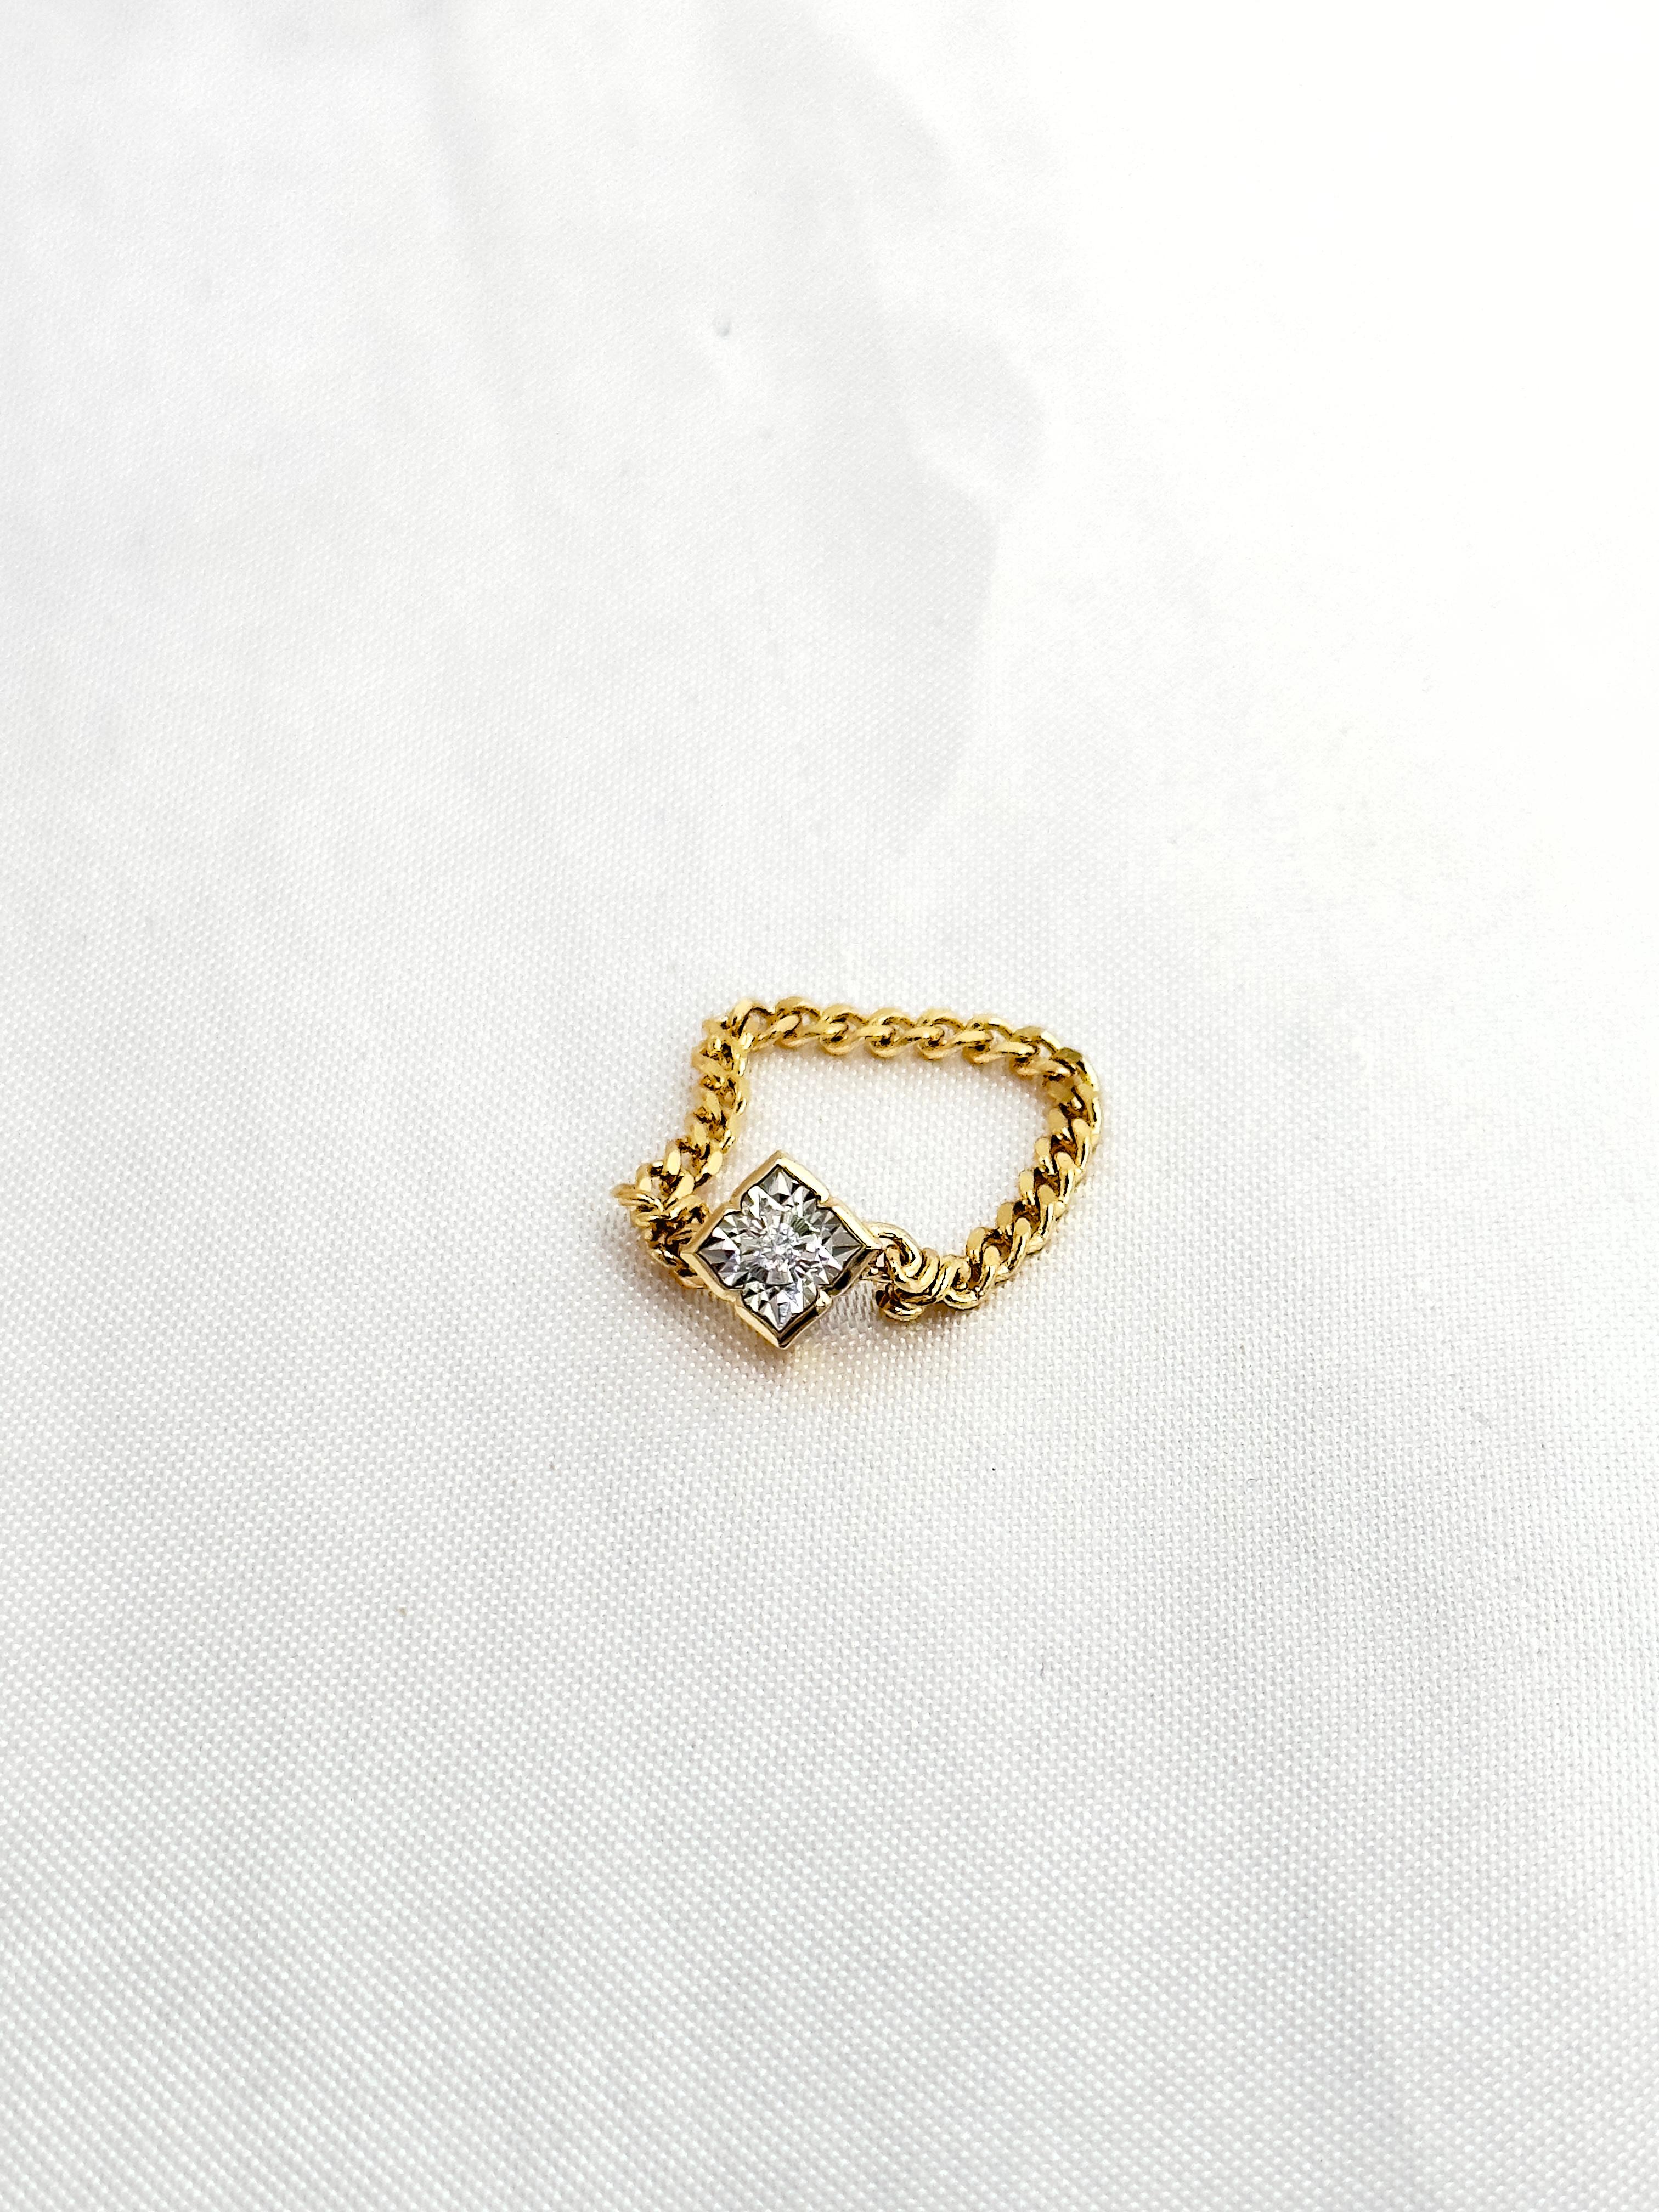 gold chain to hold wedding ring